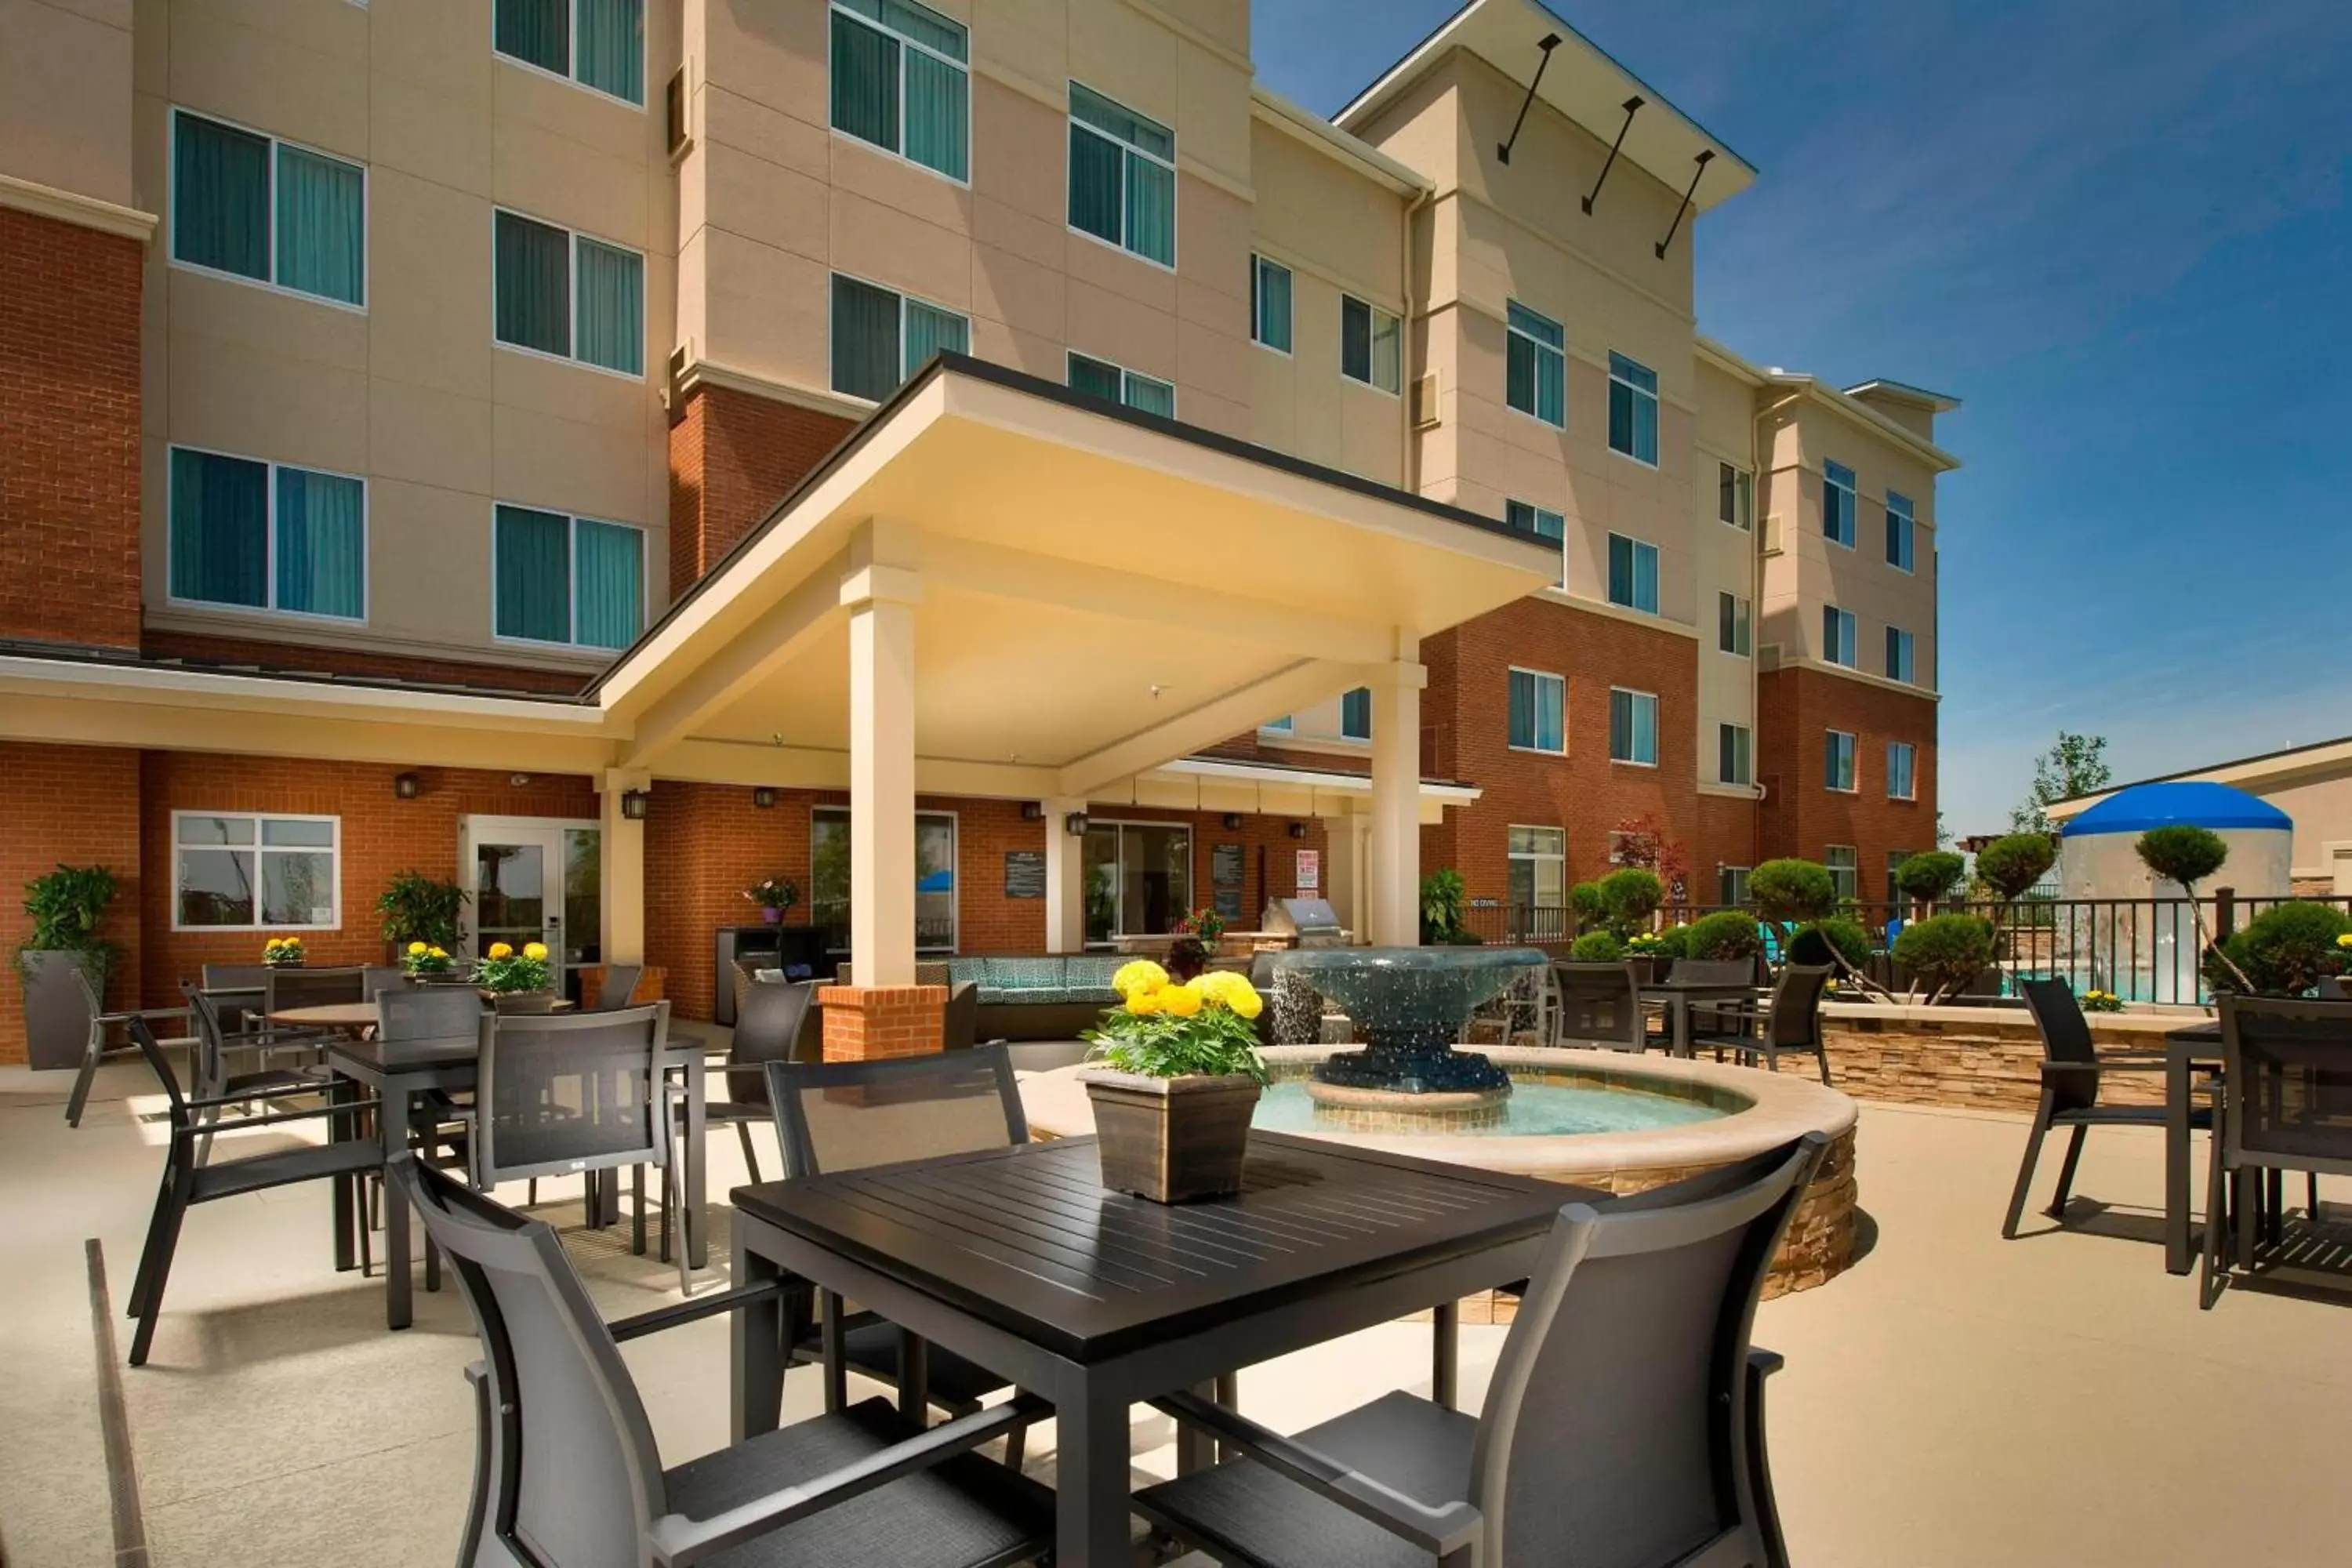 Property building in Residence Inn by Marriott Nashville South East/Murfreesboro